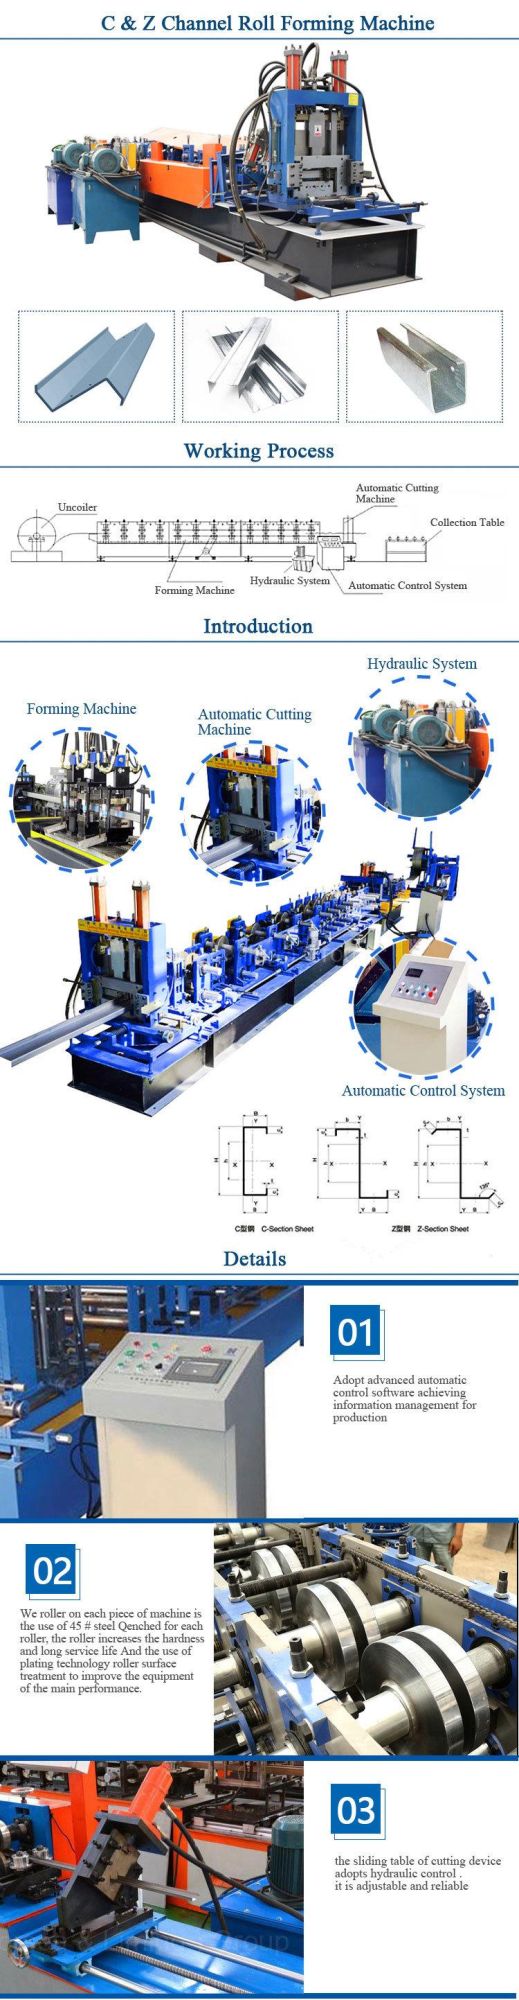 Grooved Making Machine C/Z Purlin Cold Roll Forming Machine